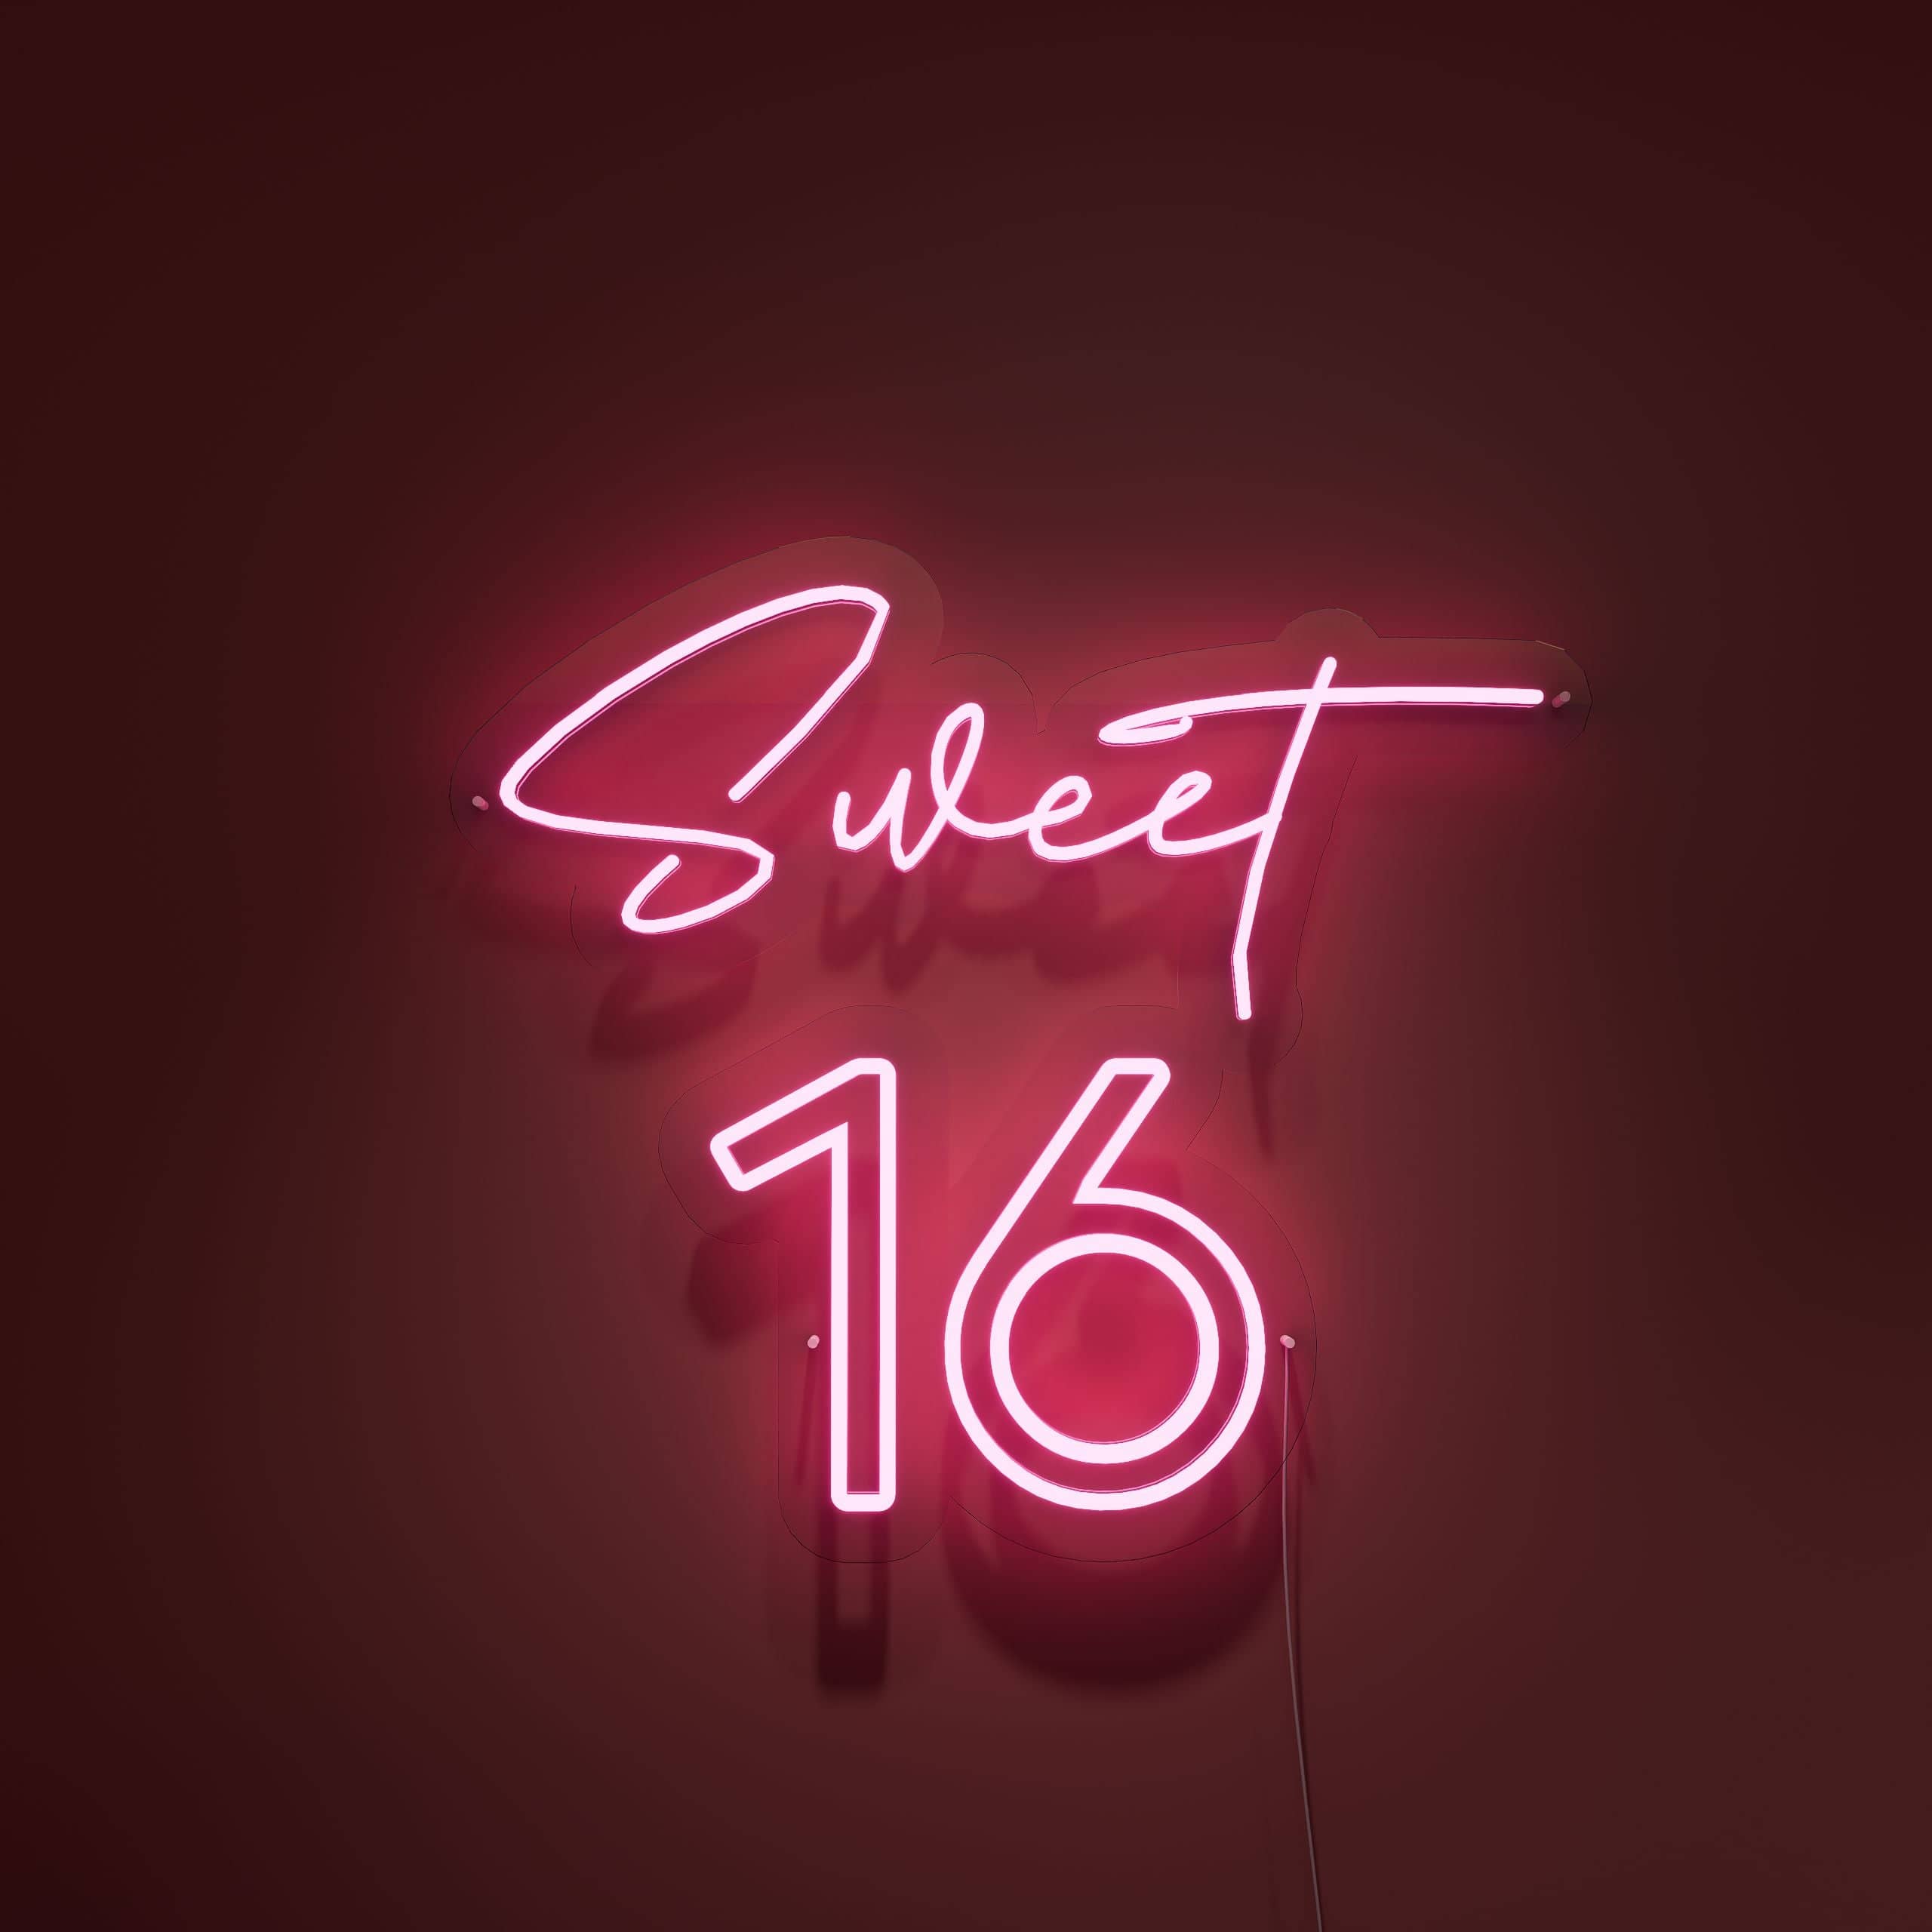 turning-sixteen-with-style!-neon-sign-lite